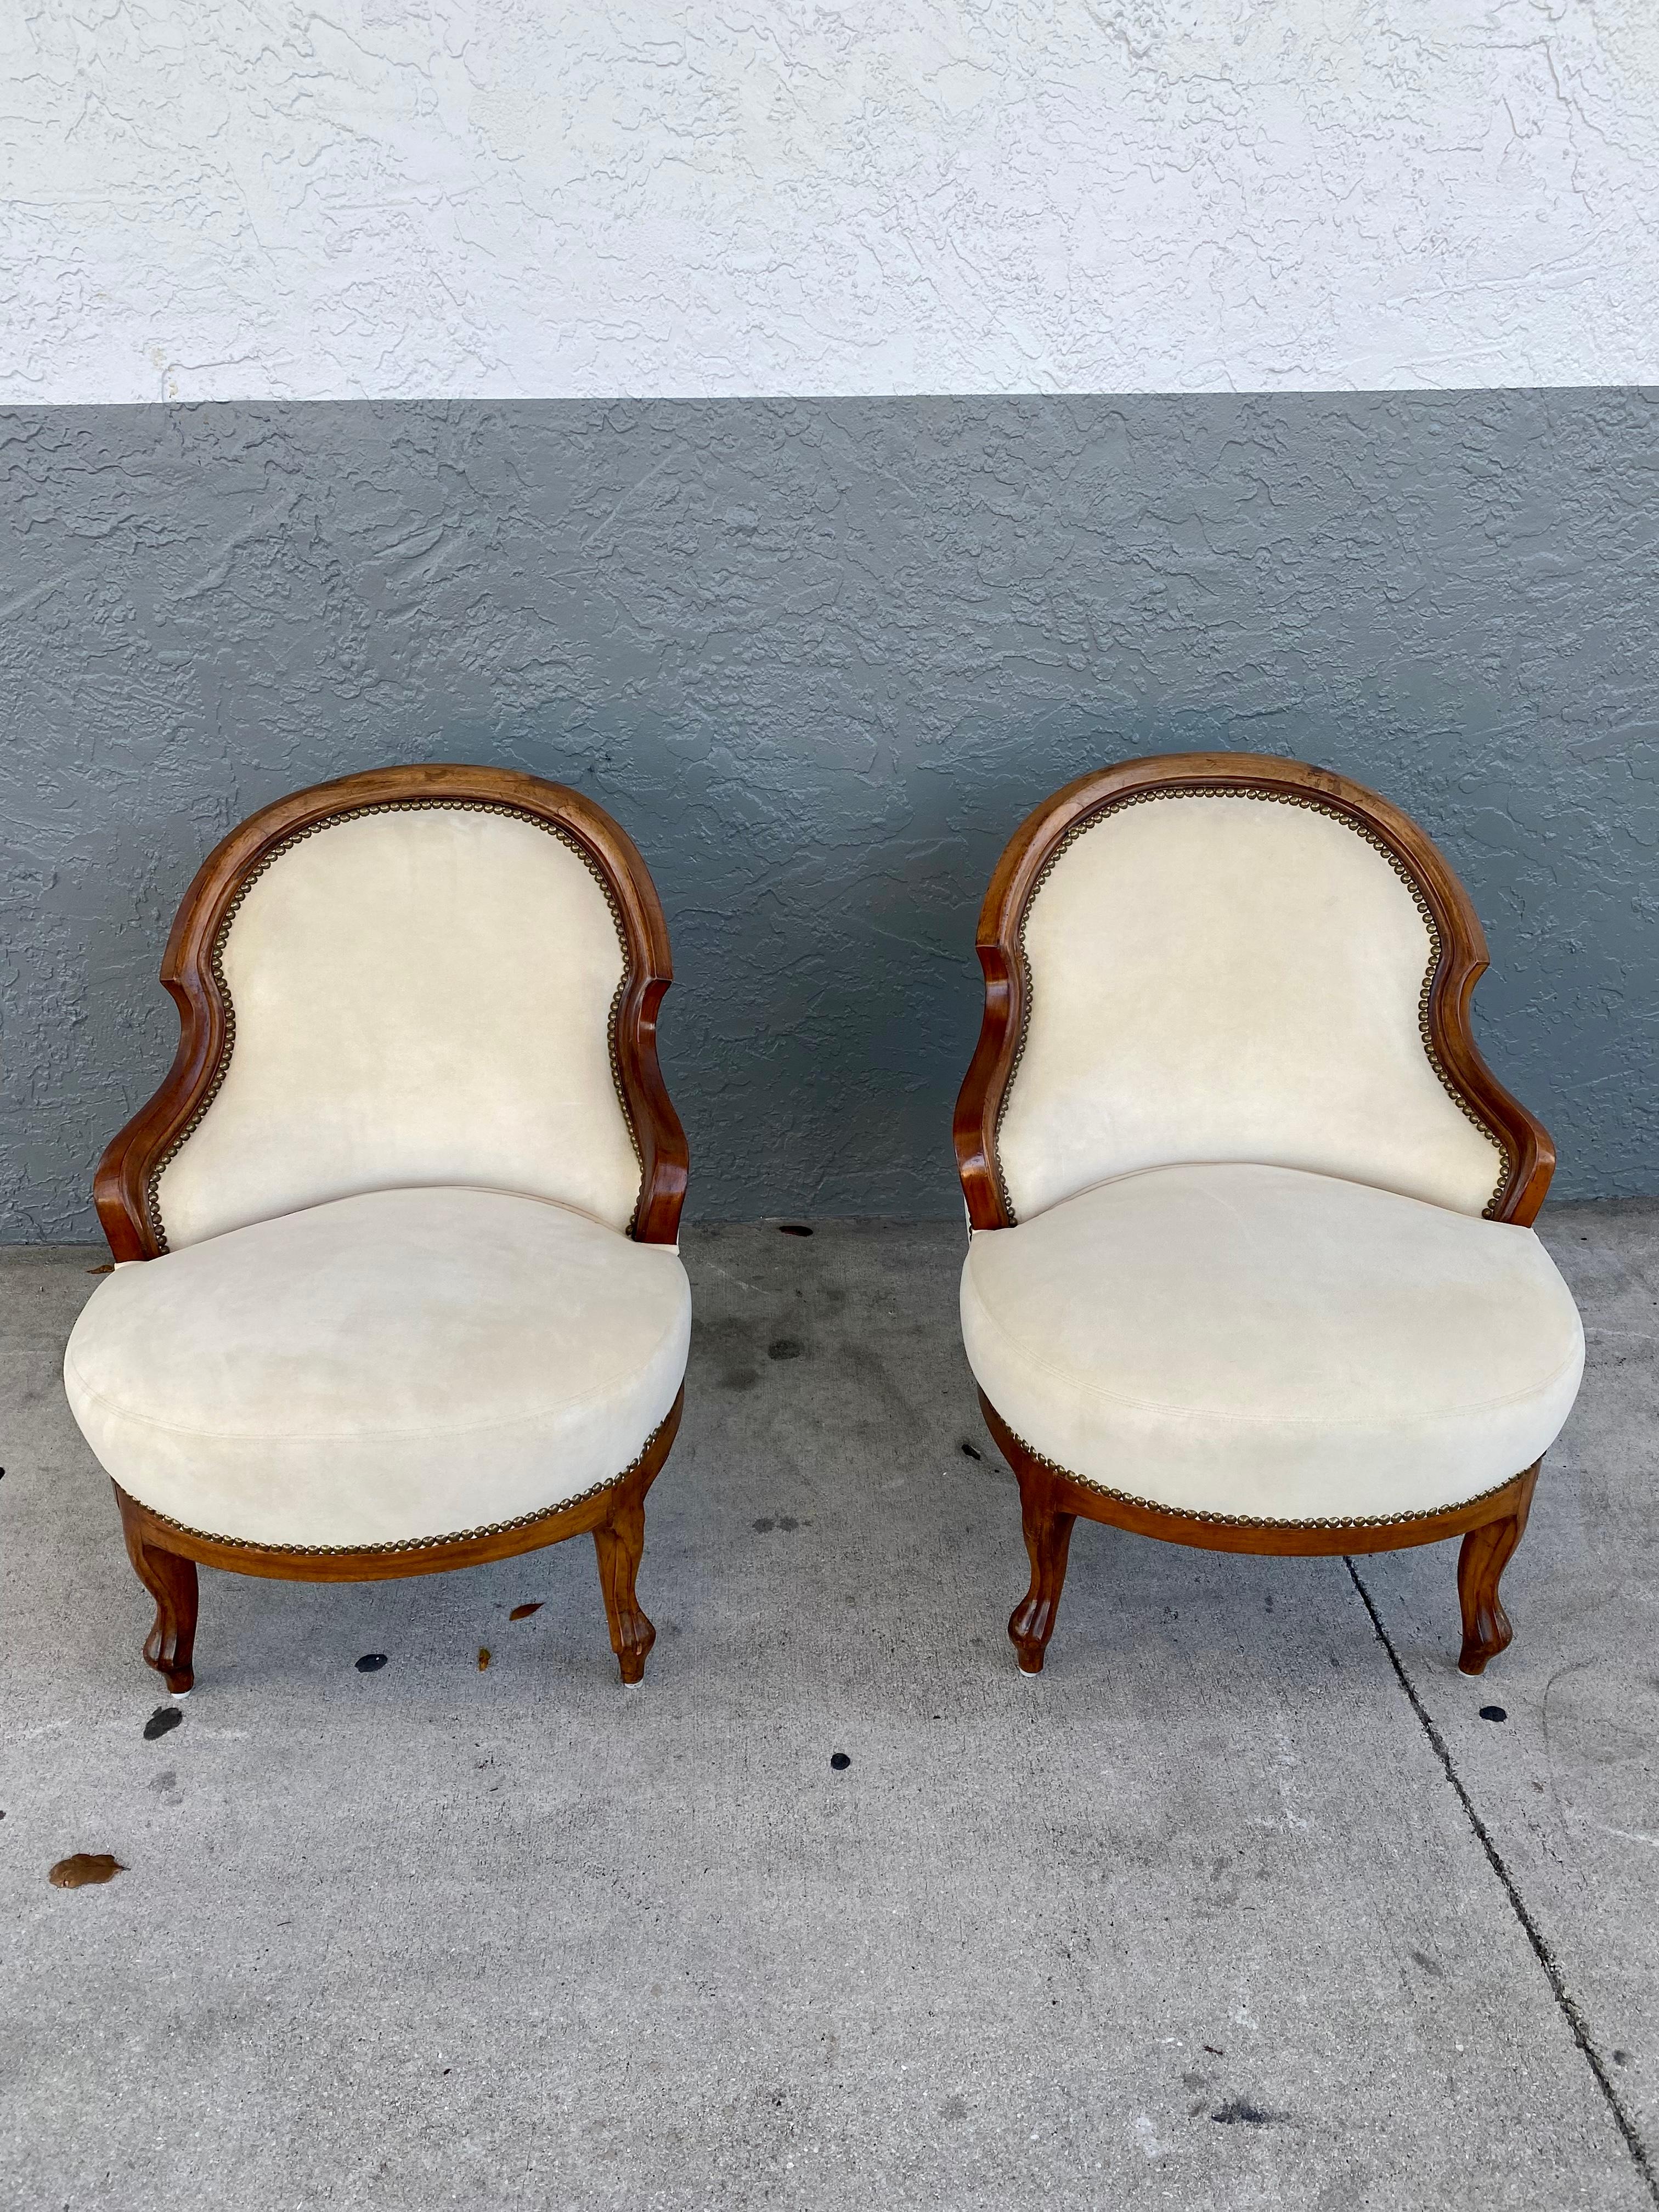 Victorian 1940s Petite Nailhead Spoon Curved Rounded Slipper Chairs, Set of 2 For Sale